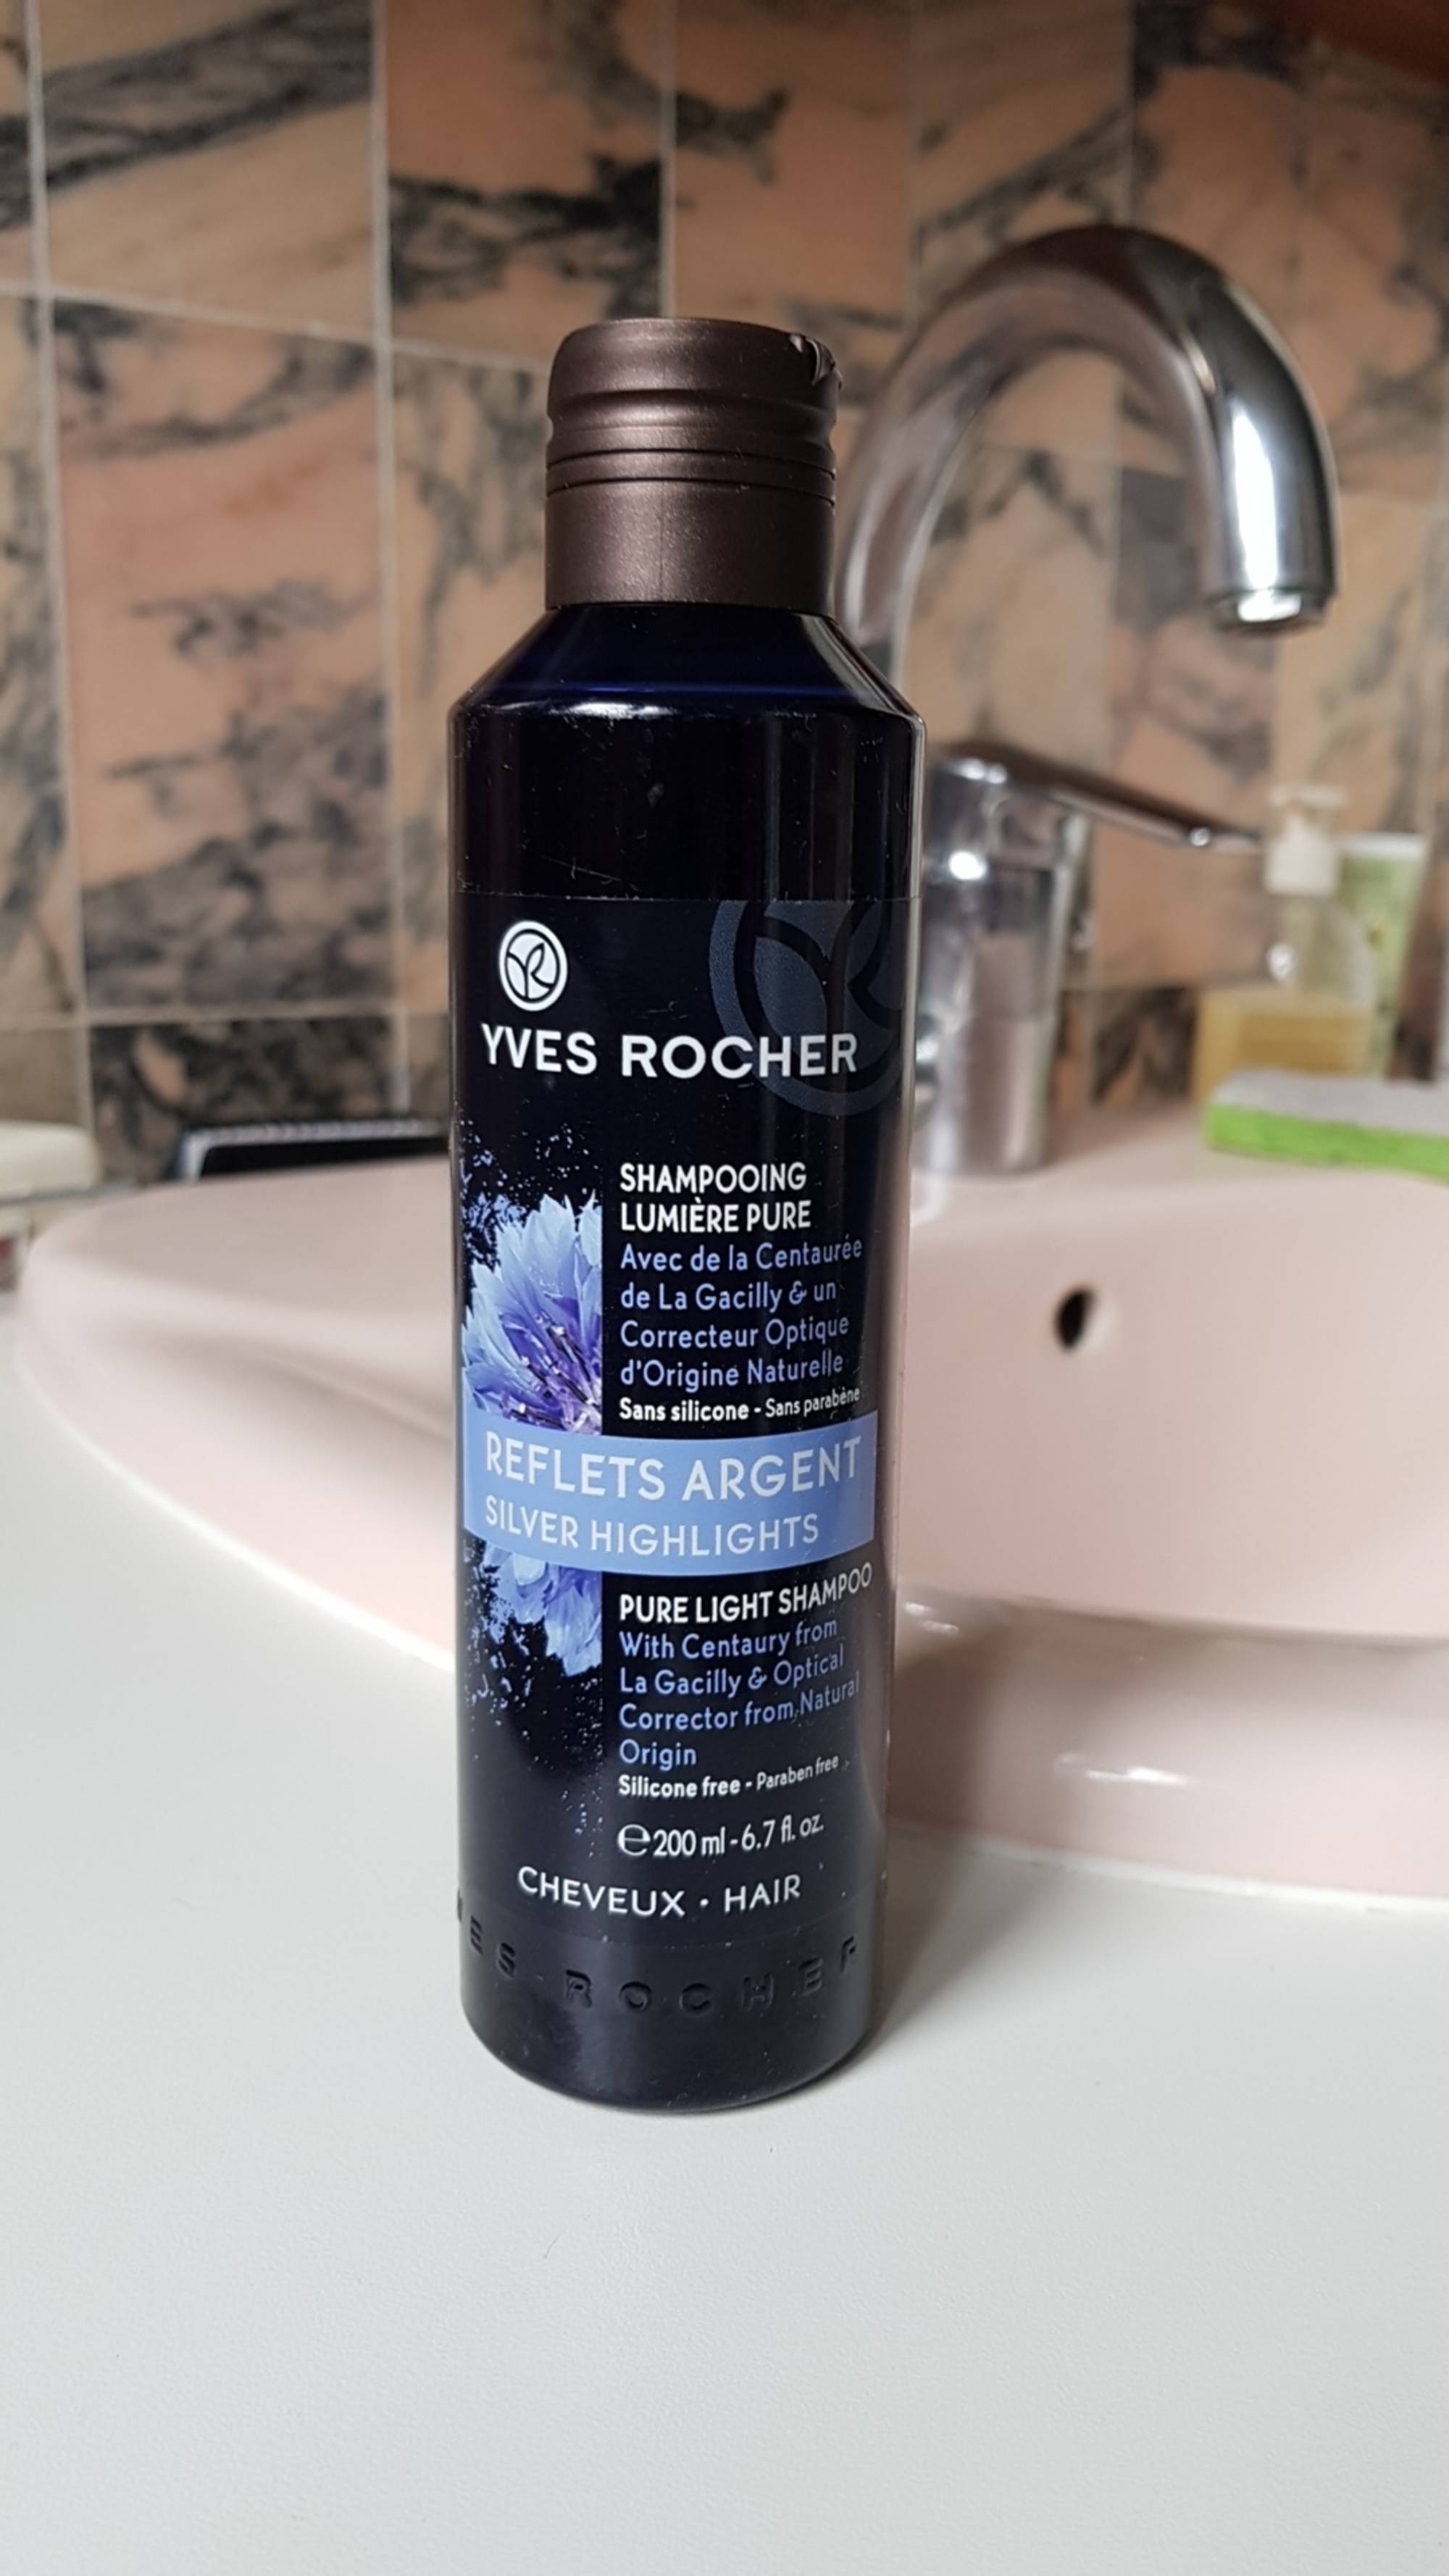 YVES ROCHER - Reflets argent - Shampooing lumière pure